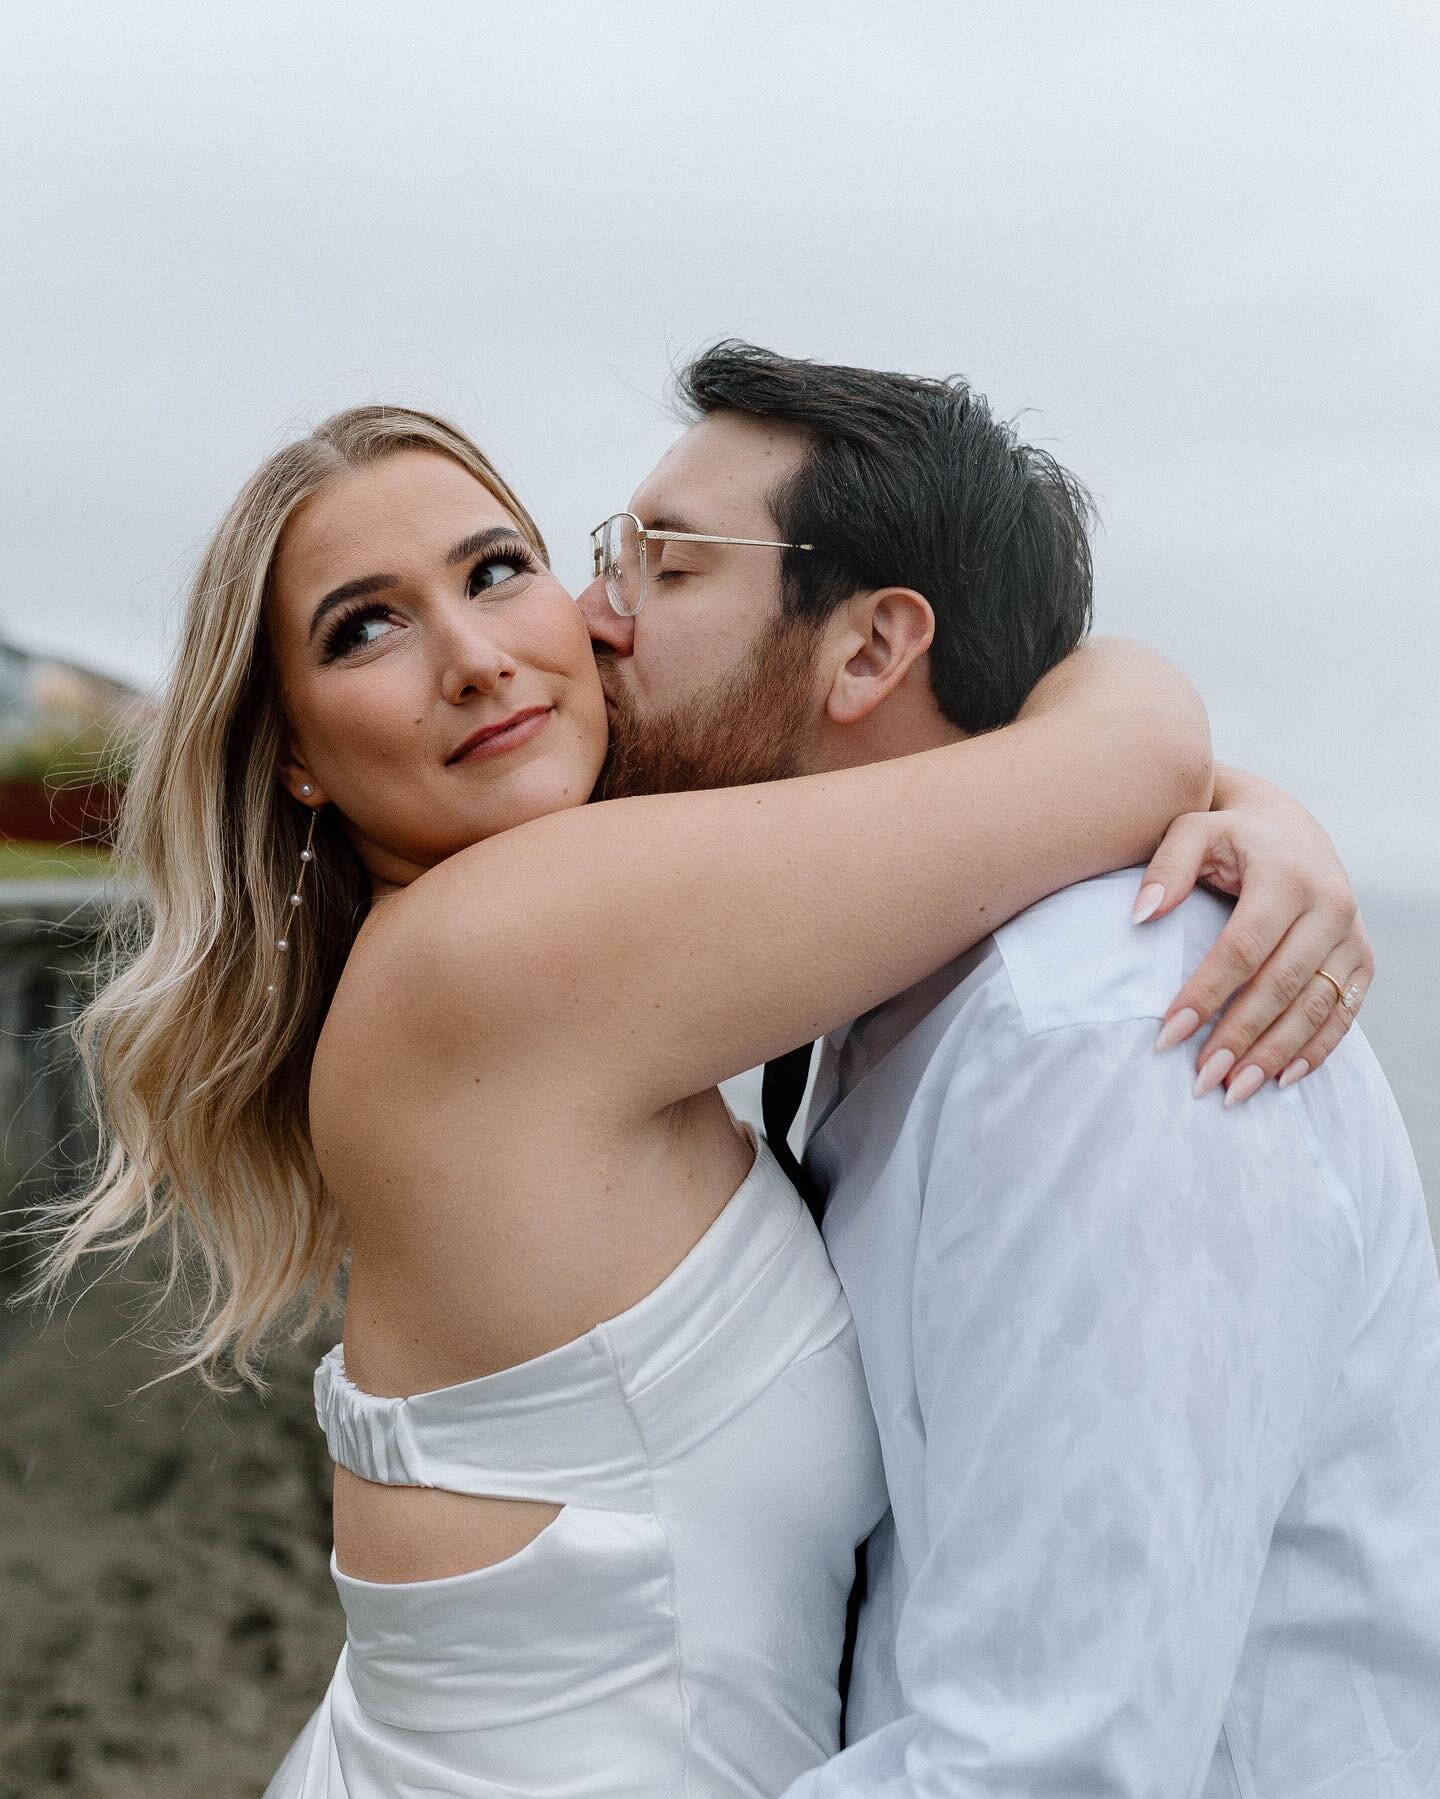 Being in the PNW, you can expect it to be raining 95% of the time in the winter. And sometimes you just have to embrace it like G+C for their engagement session! You never know&hellip;sometimes it can make for the most magical photos 😏✨
.
.
#pnwcoup